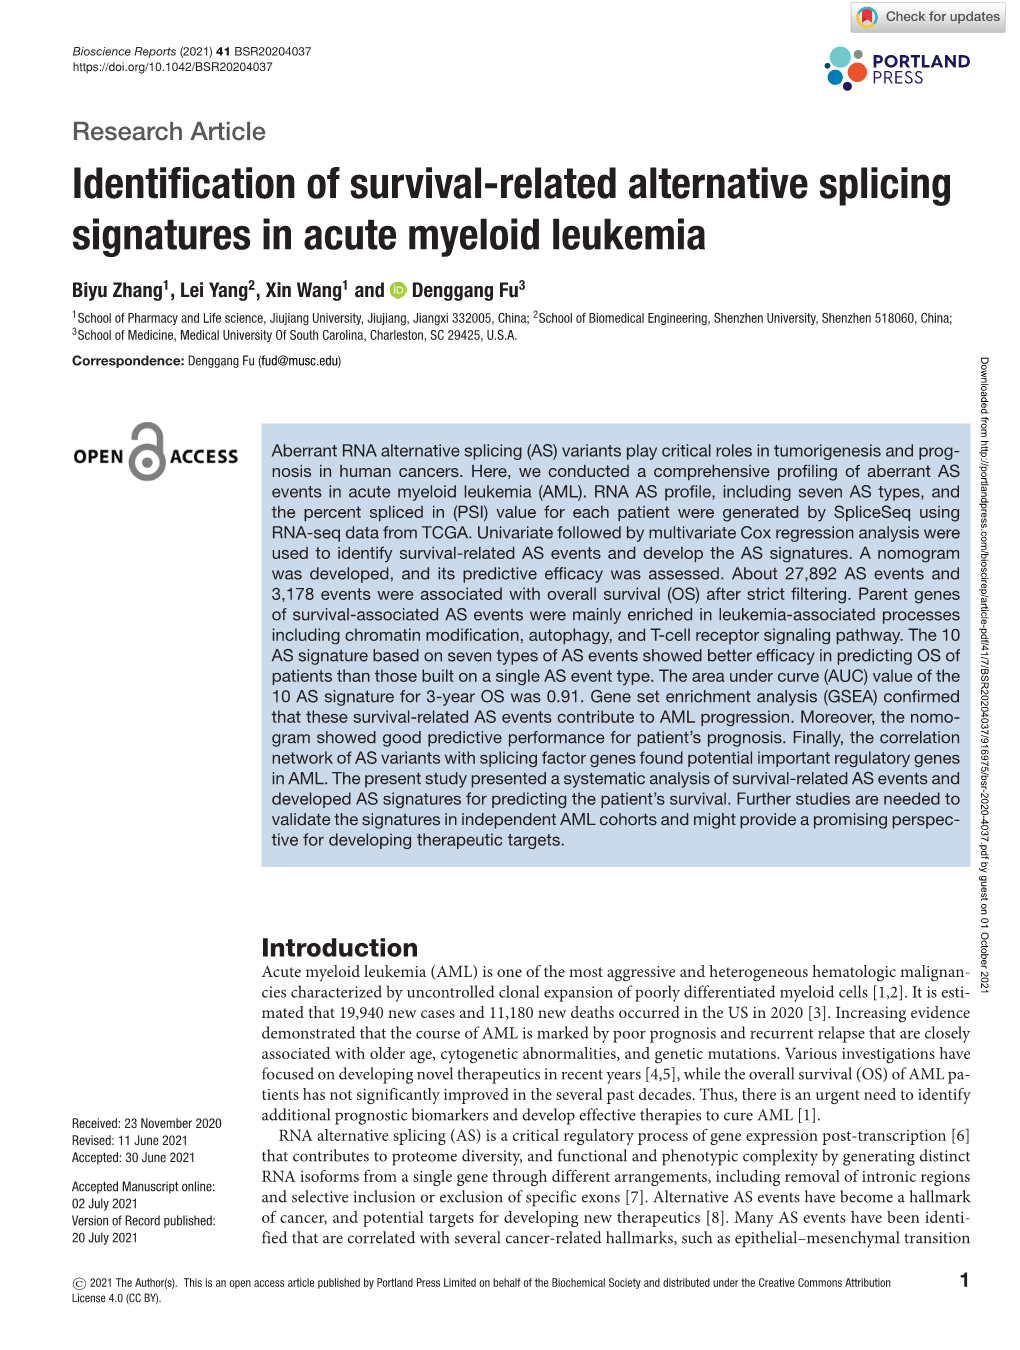 Identification of Survival-Related Alternative Splicing Signatures In